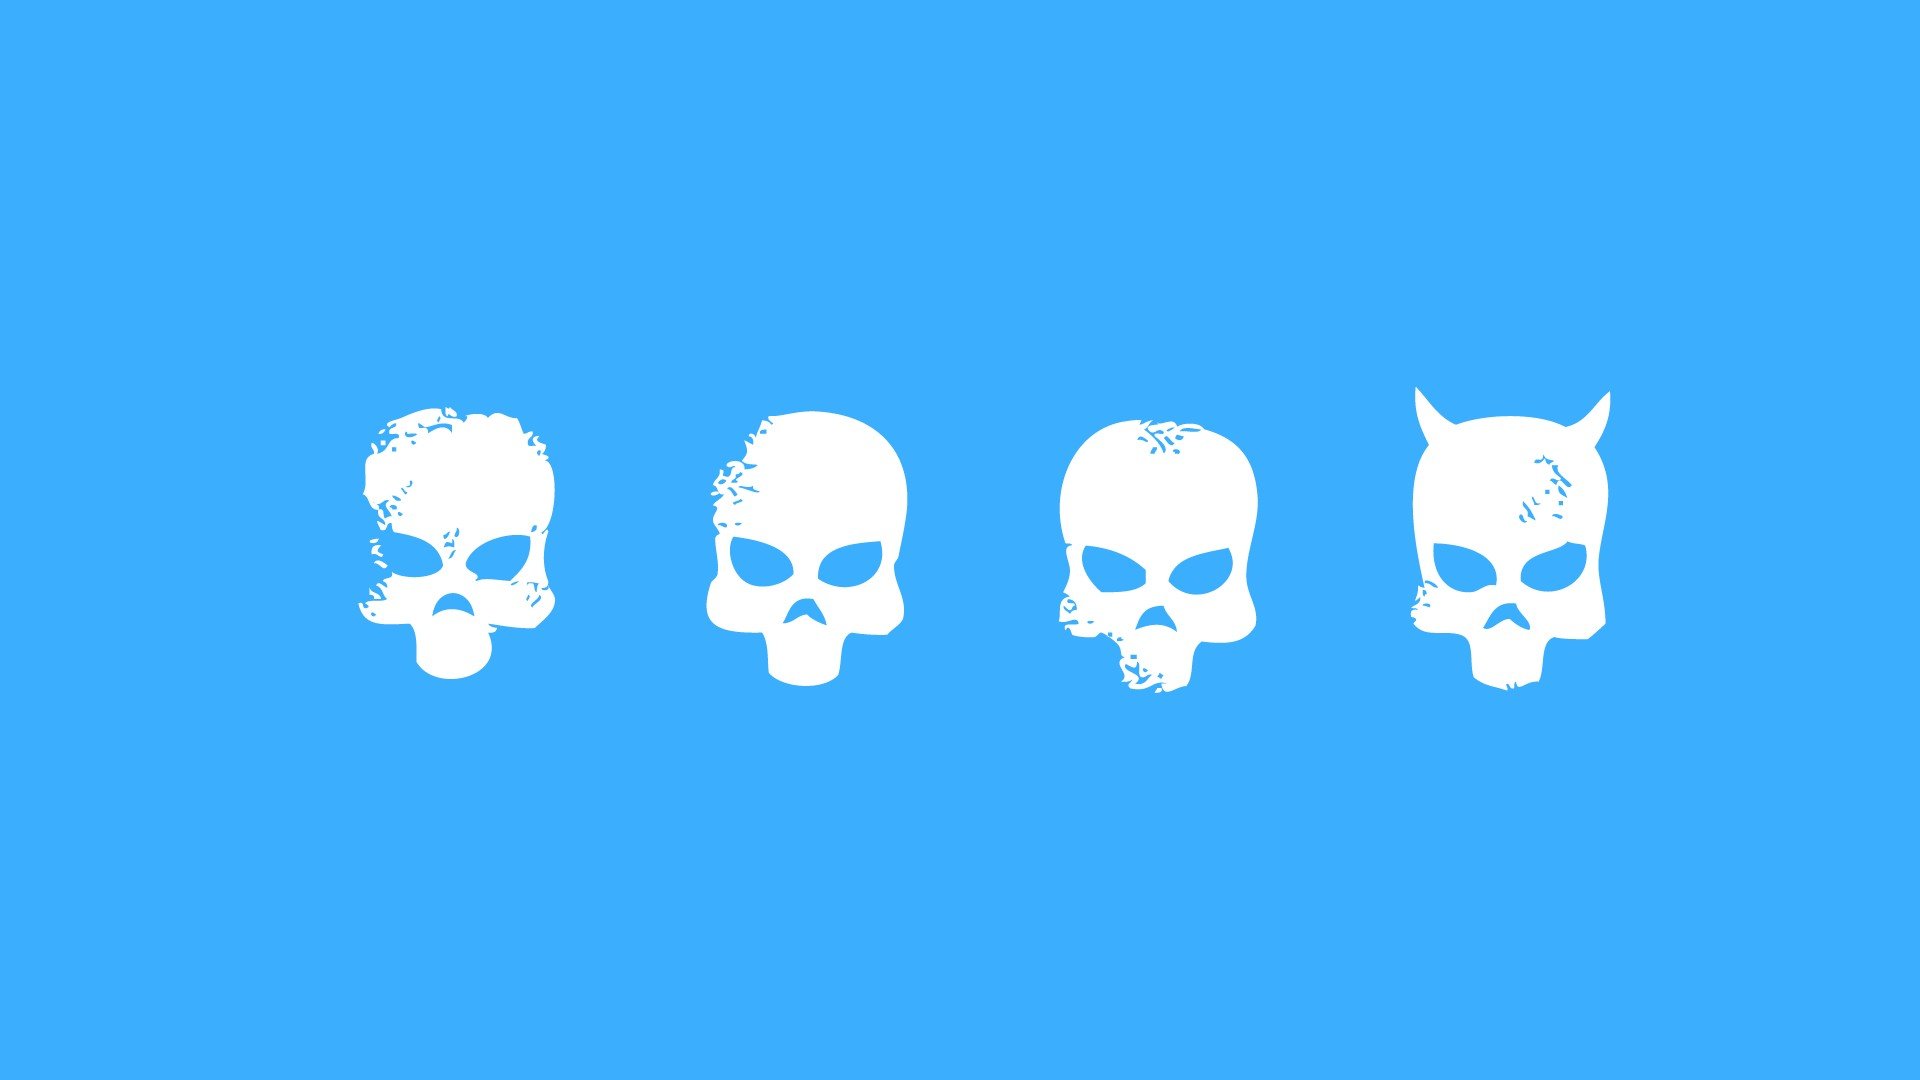 Deathwish by Nick Winters on Dribbble